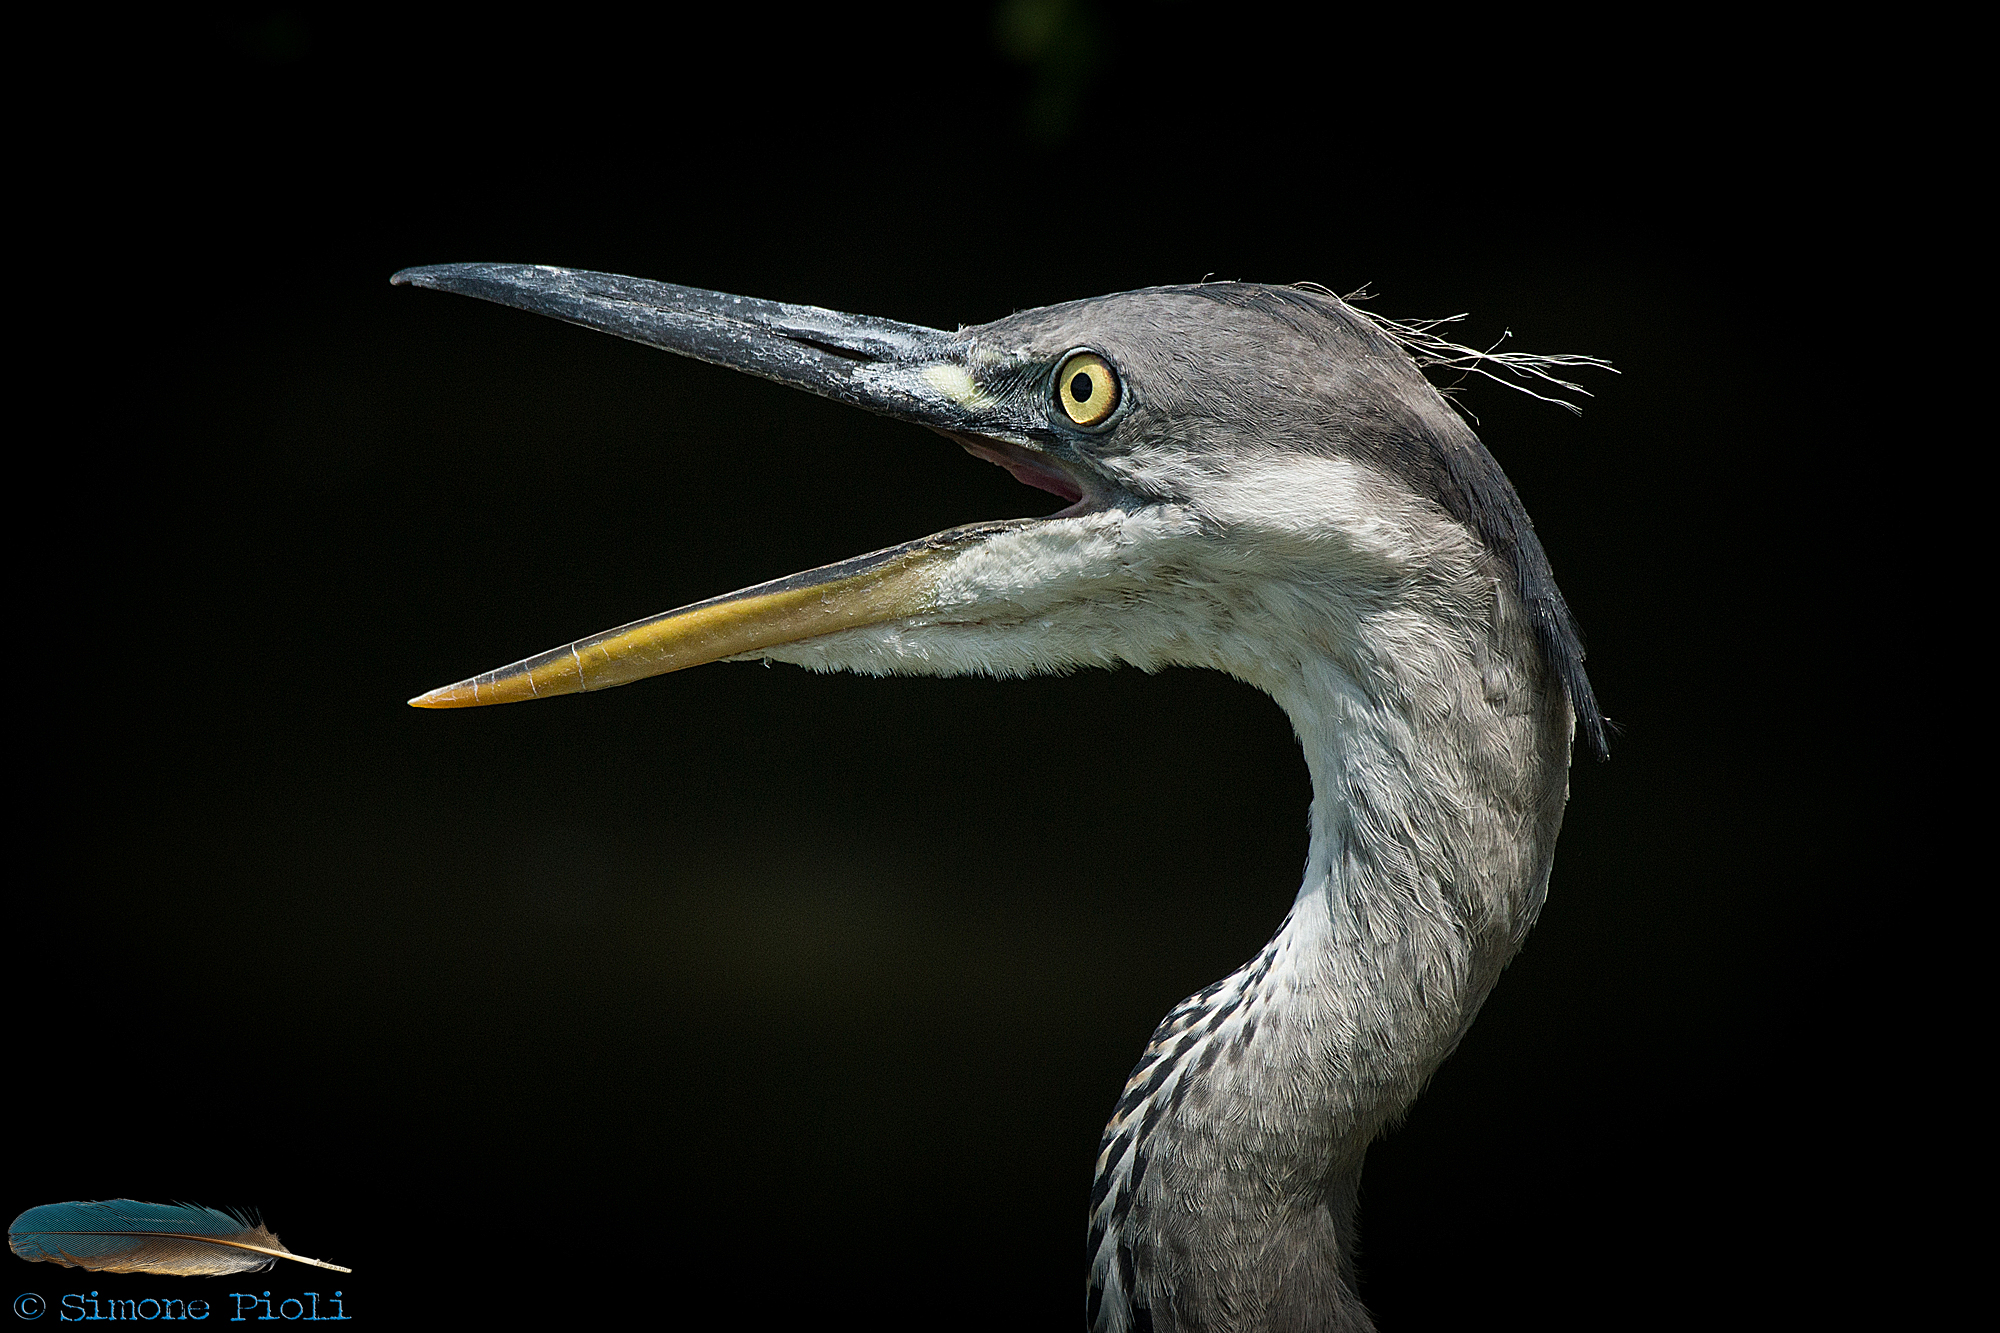 The cry of the young heron...